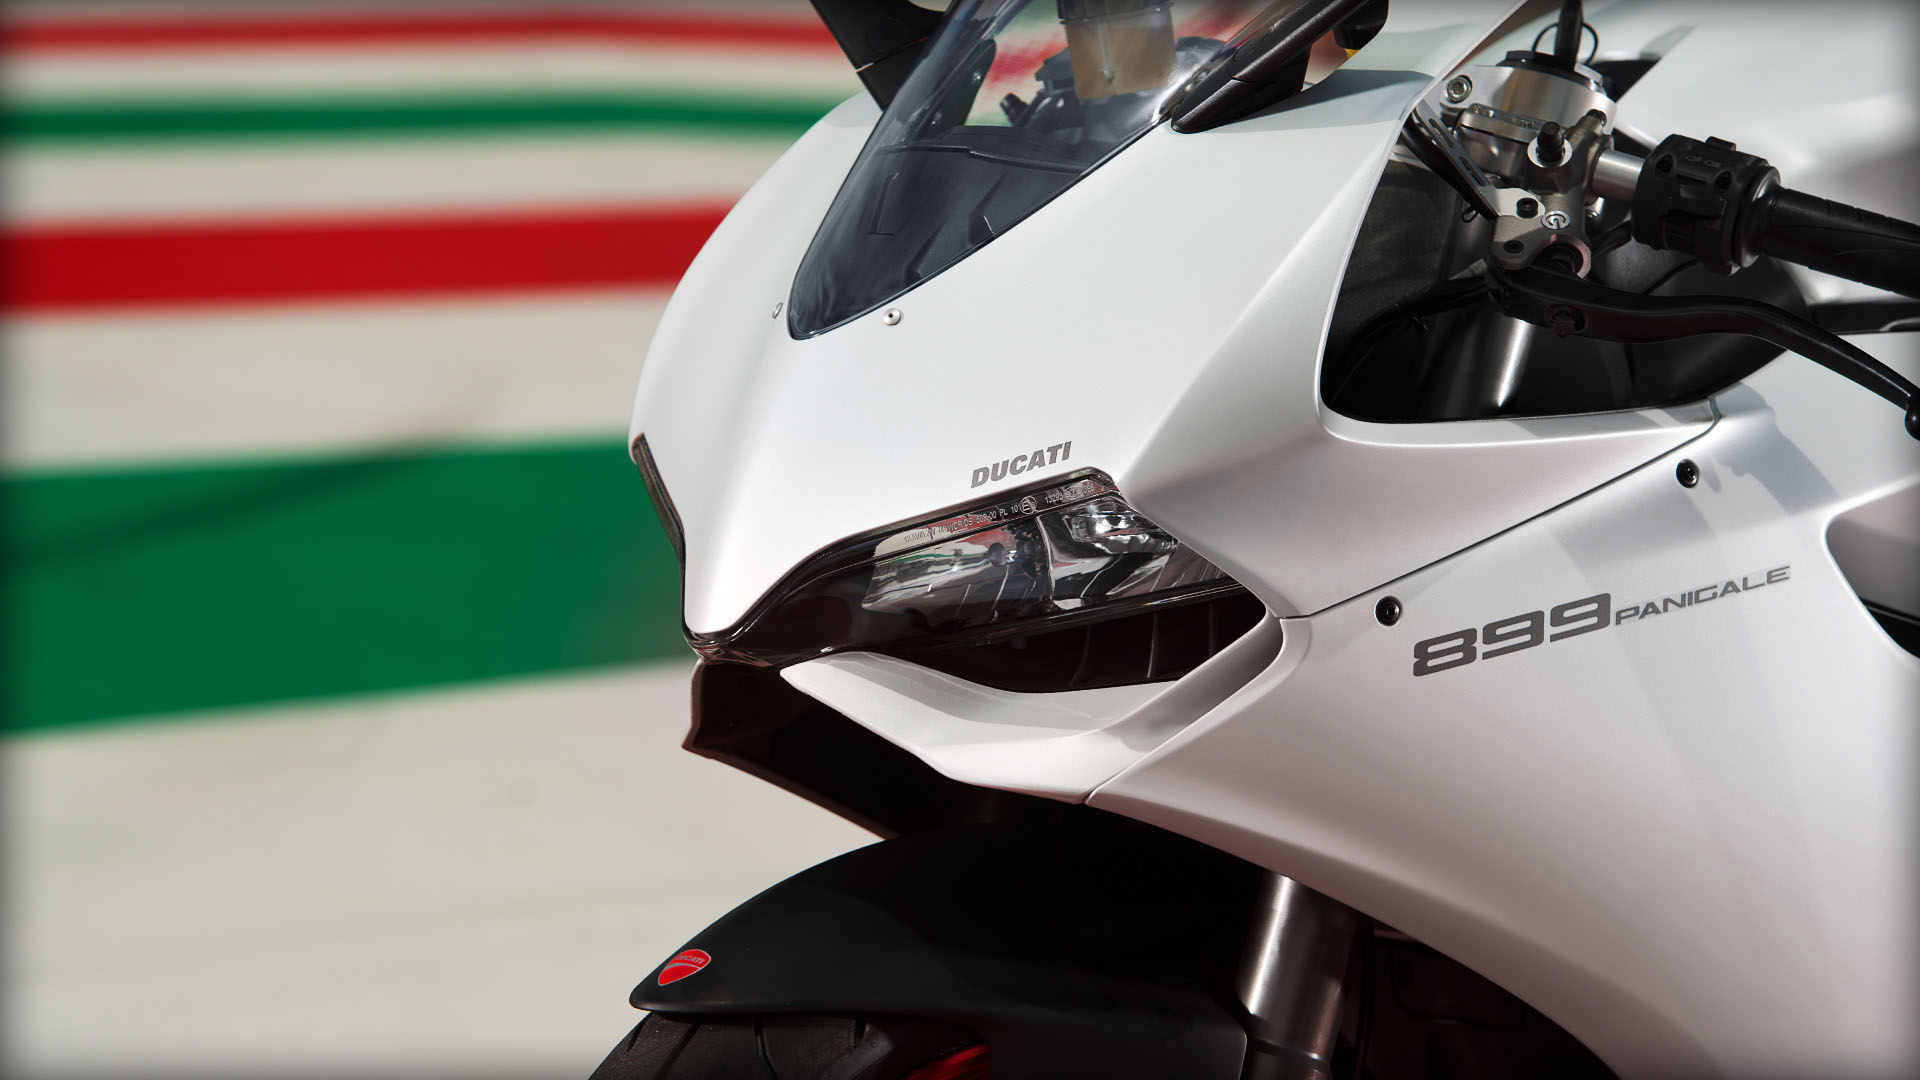 New 899 Panigale to compete in Ducati TriOptions Cup